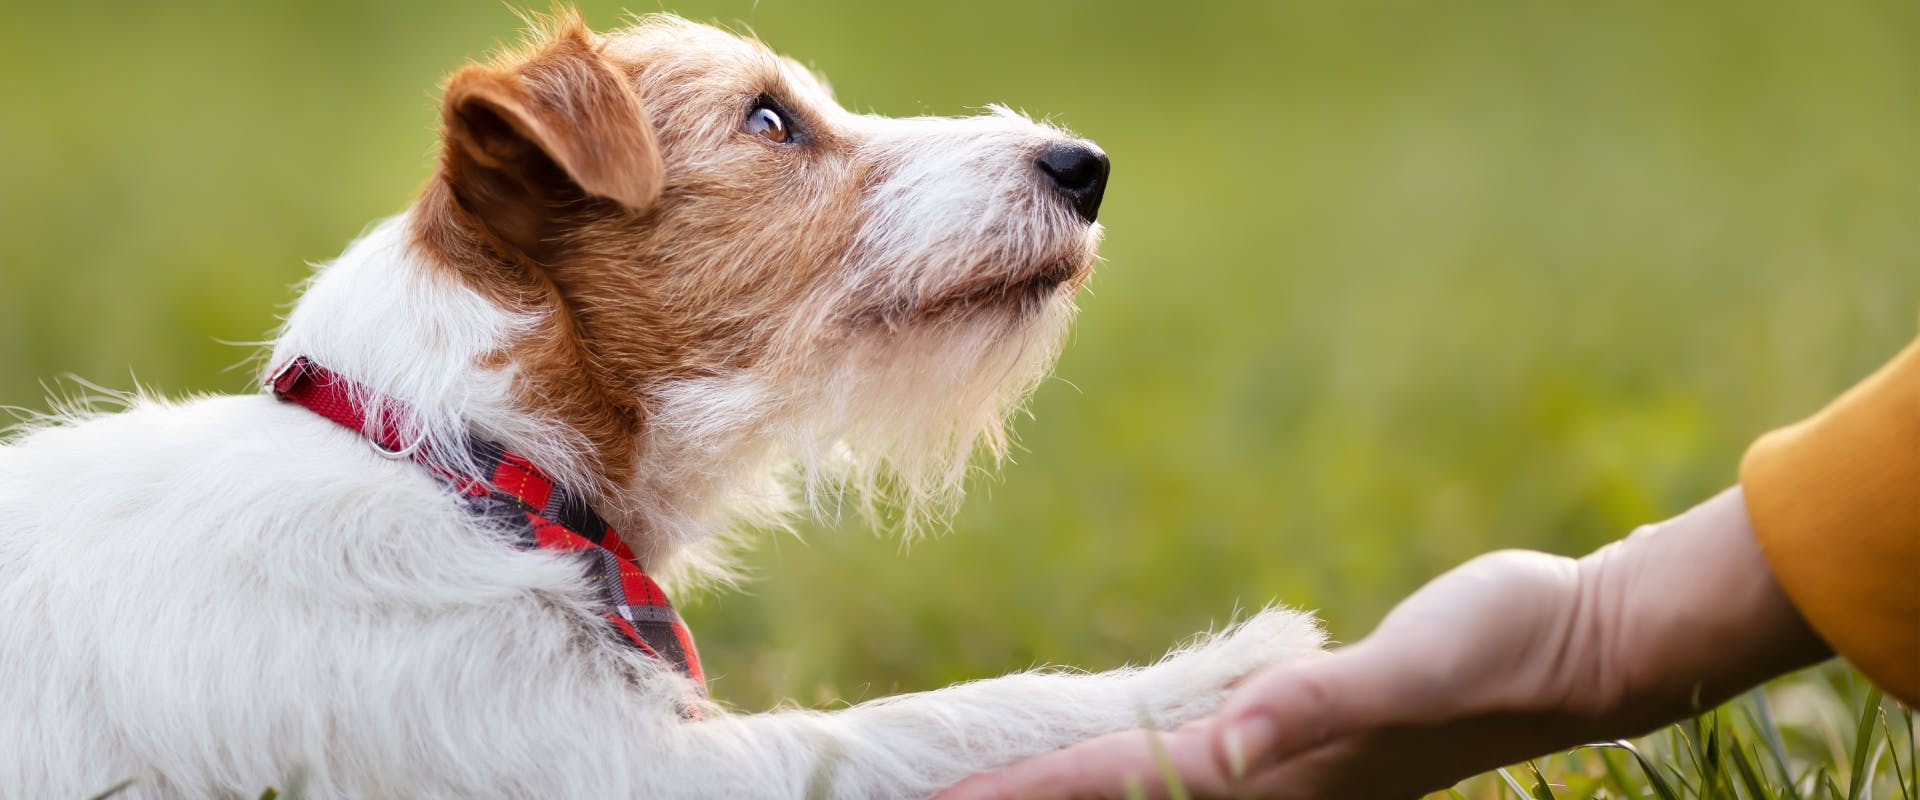 a jack russell lying on some grass looking up at a person with a paw resting on the person's outstretched hand